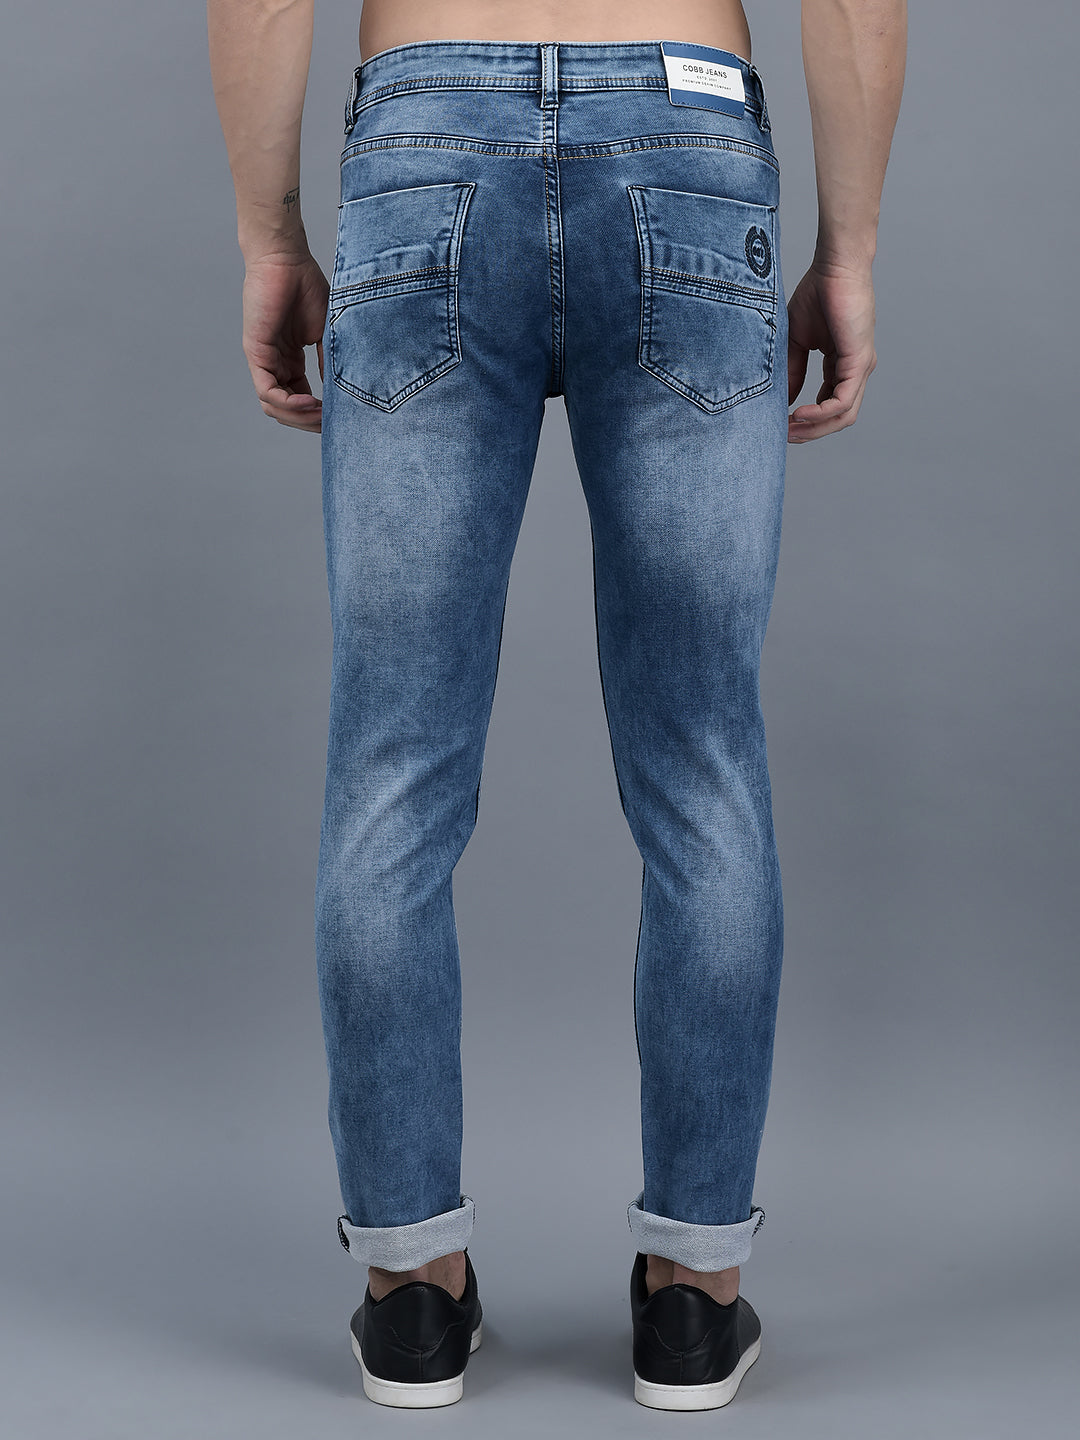 Light Blue Narrow Fit Jeans: Stylish Comfort Occasion